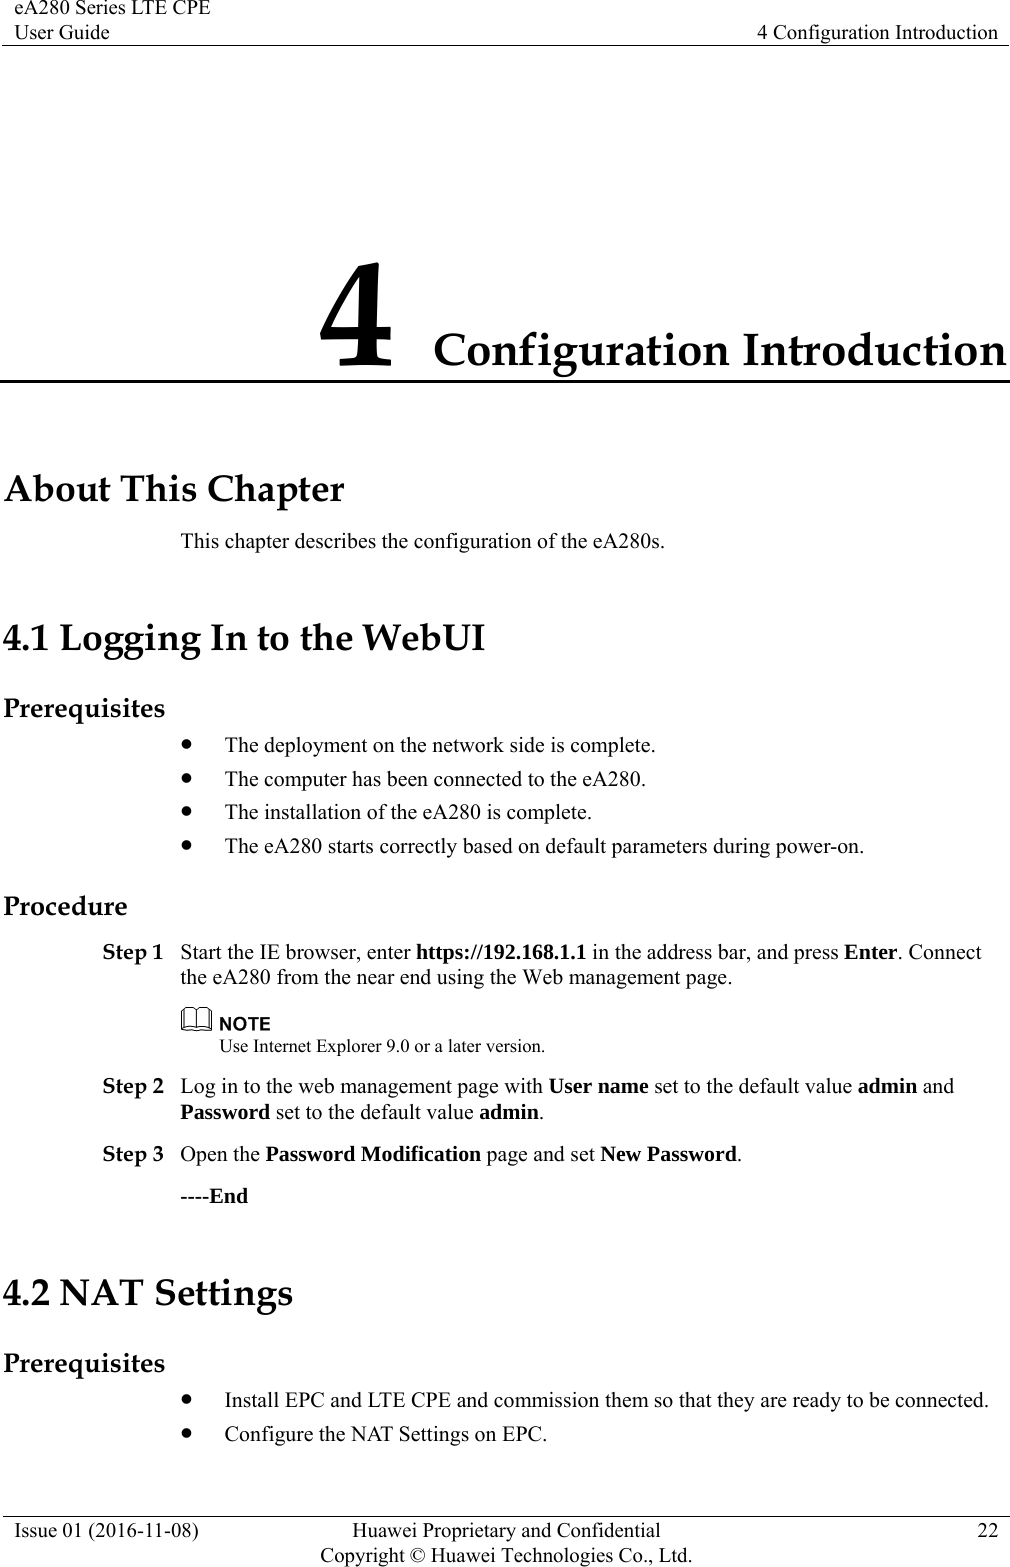 eA280 Series LTE CPE User Guide  4 Configuration Introduction Issue 01 (2016-11-08)  Huawei Proprietary and Confidential         Copyright © Huawei Technologies Co., Ltd.22 4 Configuration Introduction About This Chapter This chapter describes the configuration of the eA280s. 4.1 Logging In to the WebUI Prerequisites  The deployment on the network side is complete.  The computer has been connected to the eA280.  The installation of the eA280 is complete.  The eA280 starts correctly based on default parameters during power-on. Procedure Step 1 Start the IE browser, enter https://192.168.1.1 in the address bar, and press Enter. Connect the eA280 from the near end using the Web management page.  Use Internet Explorer 9.0 or a later version. Step 2 Log in to the web management page with User name set to the default value admin and Password set to the default value admin. Step 3 Open the Password Modification page and set New Password. ----End 4.2 NAT Settings Prerequisites  Install EPC and LTE CPE and commission them so that they are ready to be connected.  Configure the NAT Settings on EPC. 